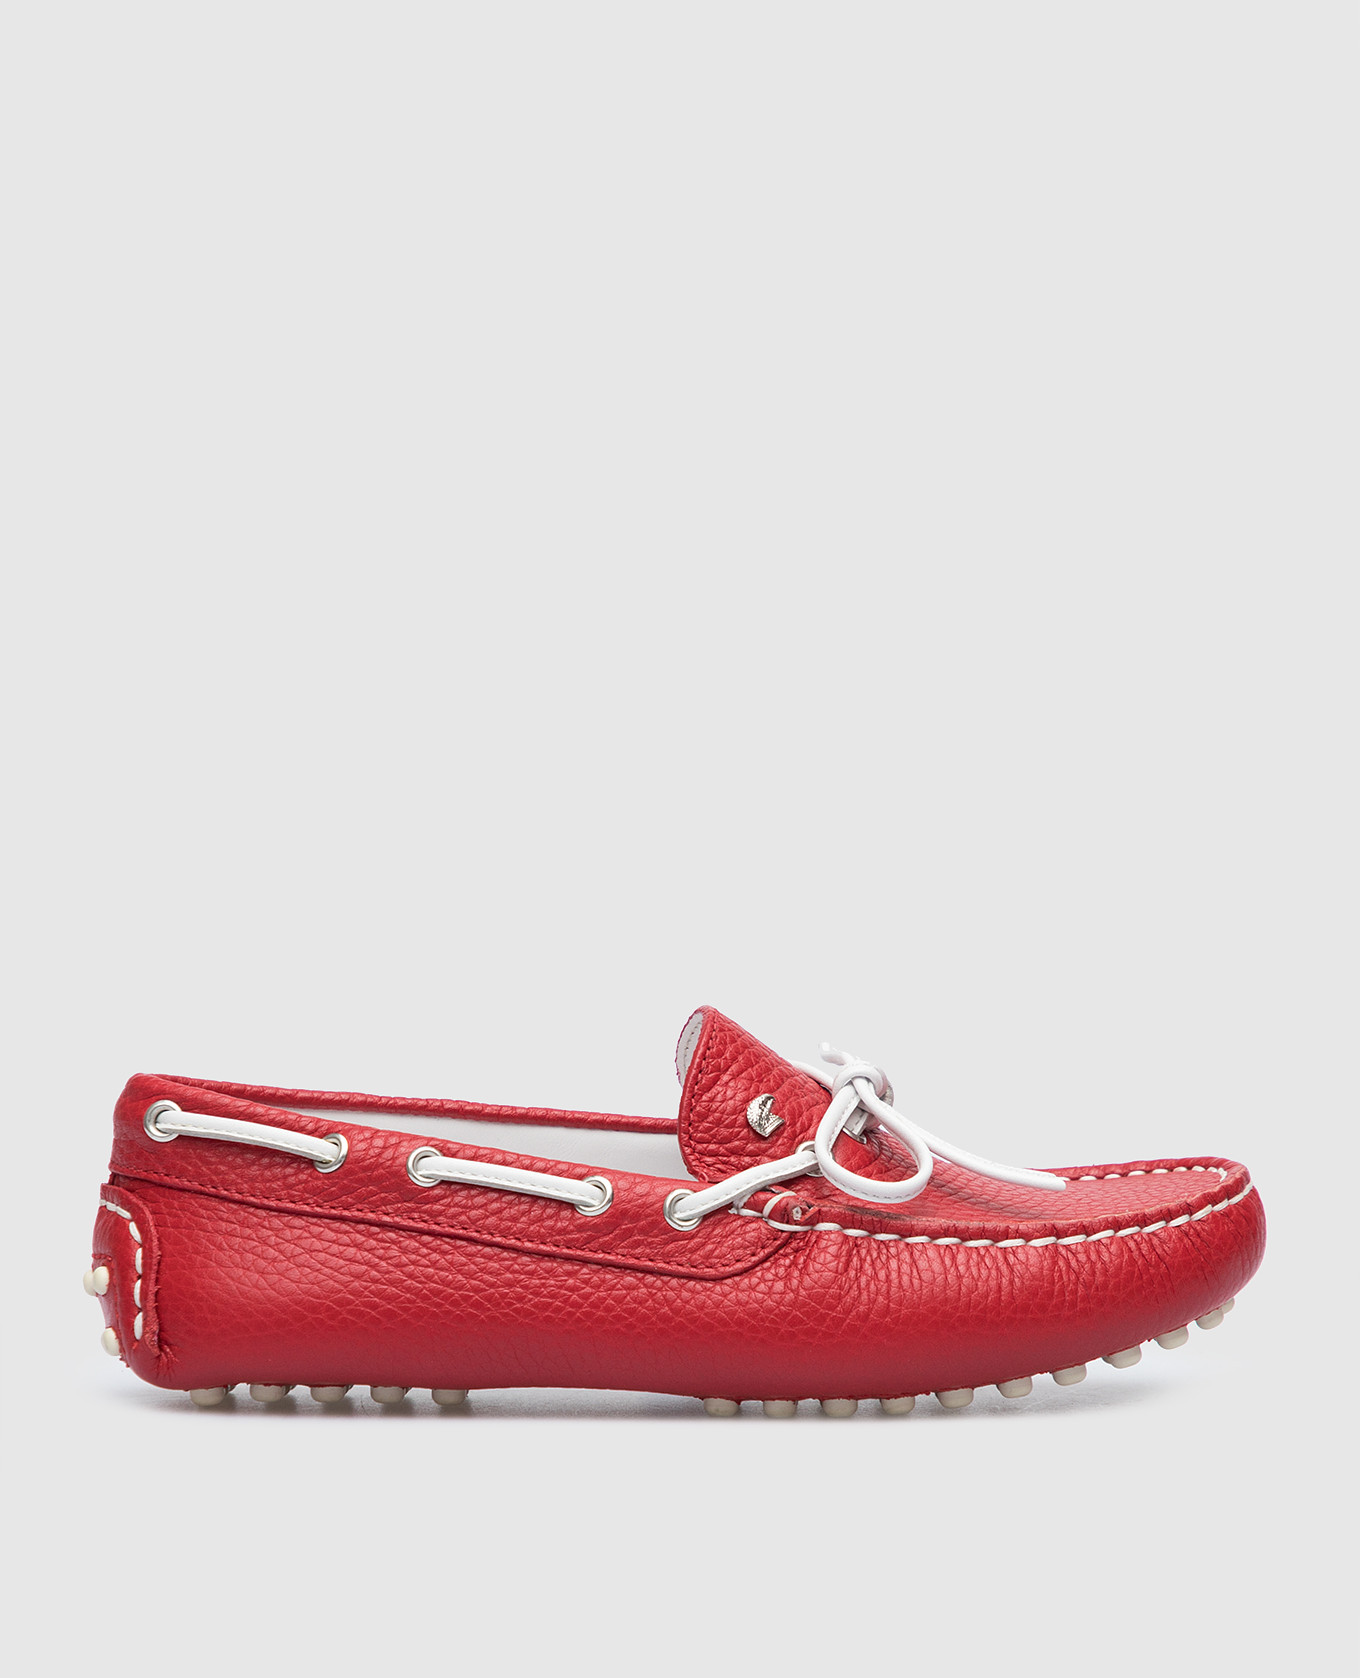 Children's red leather moccasins